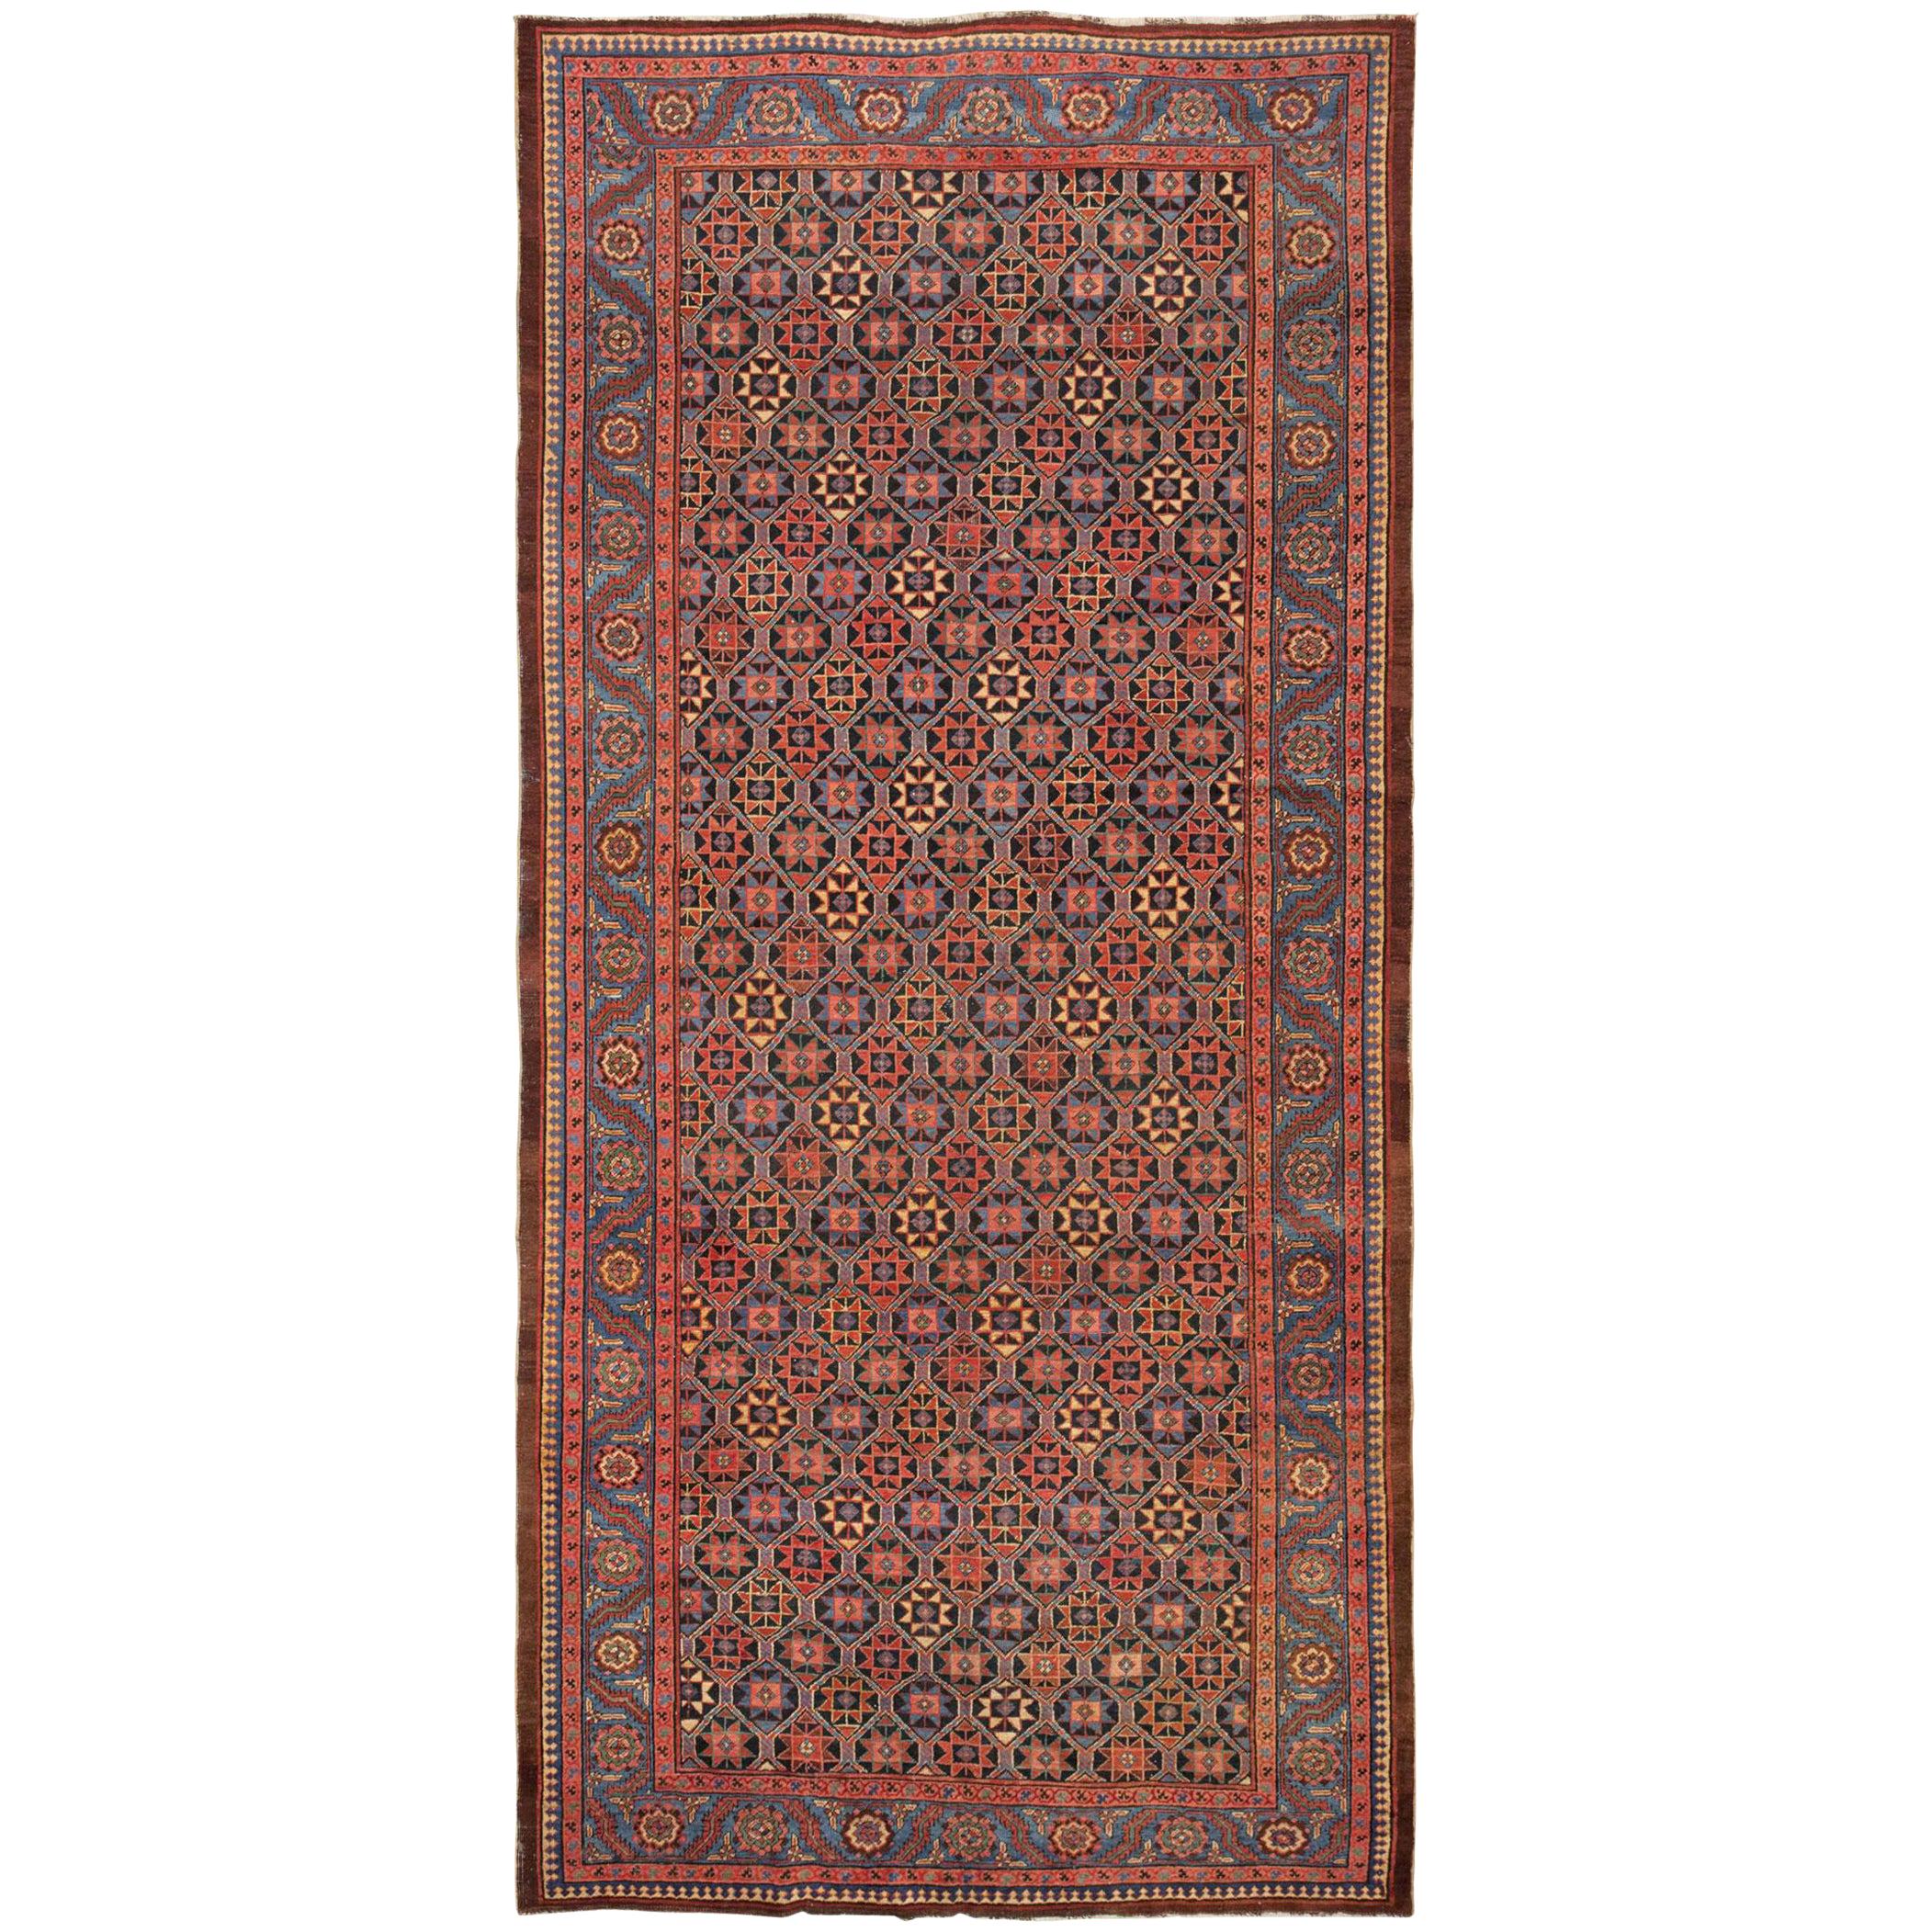 Antique Persian Bakshaish Gallery Size Rug. Size: 6 ft 7 in x 13 ft 9 in 